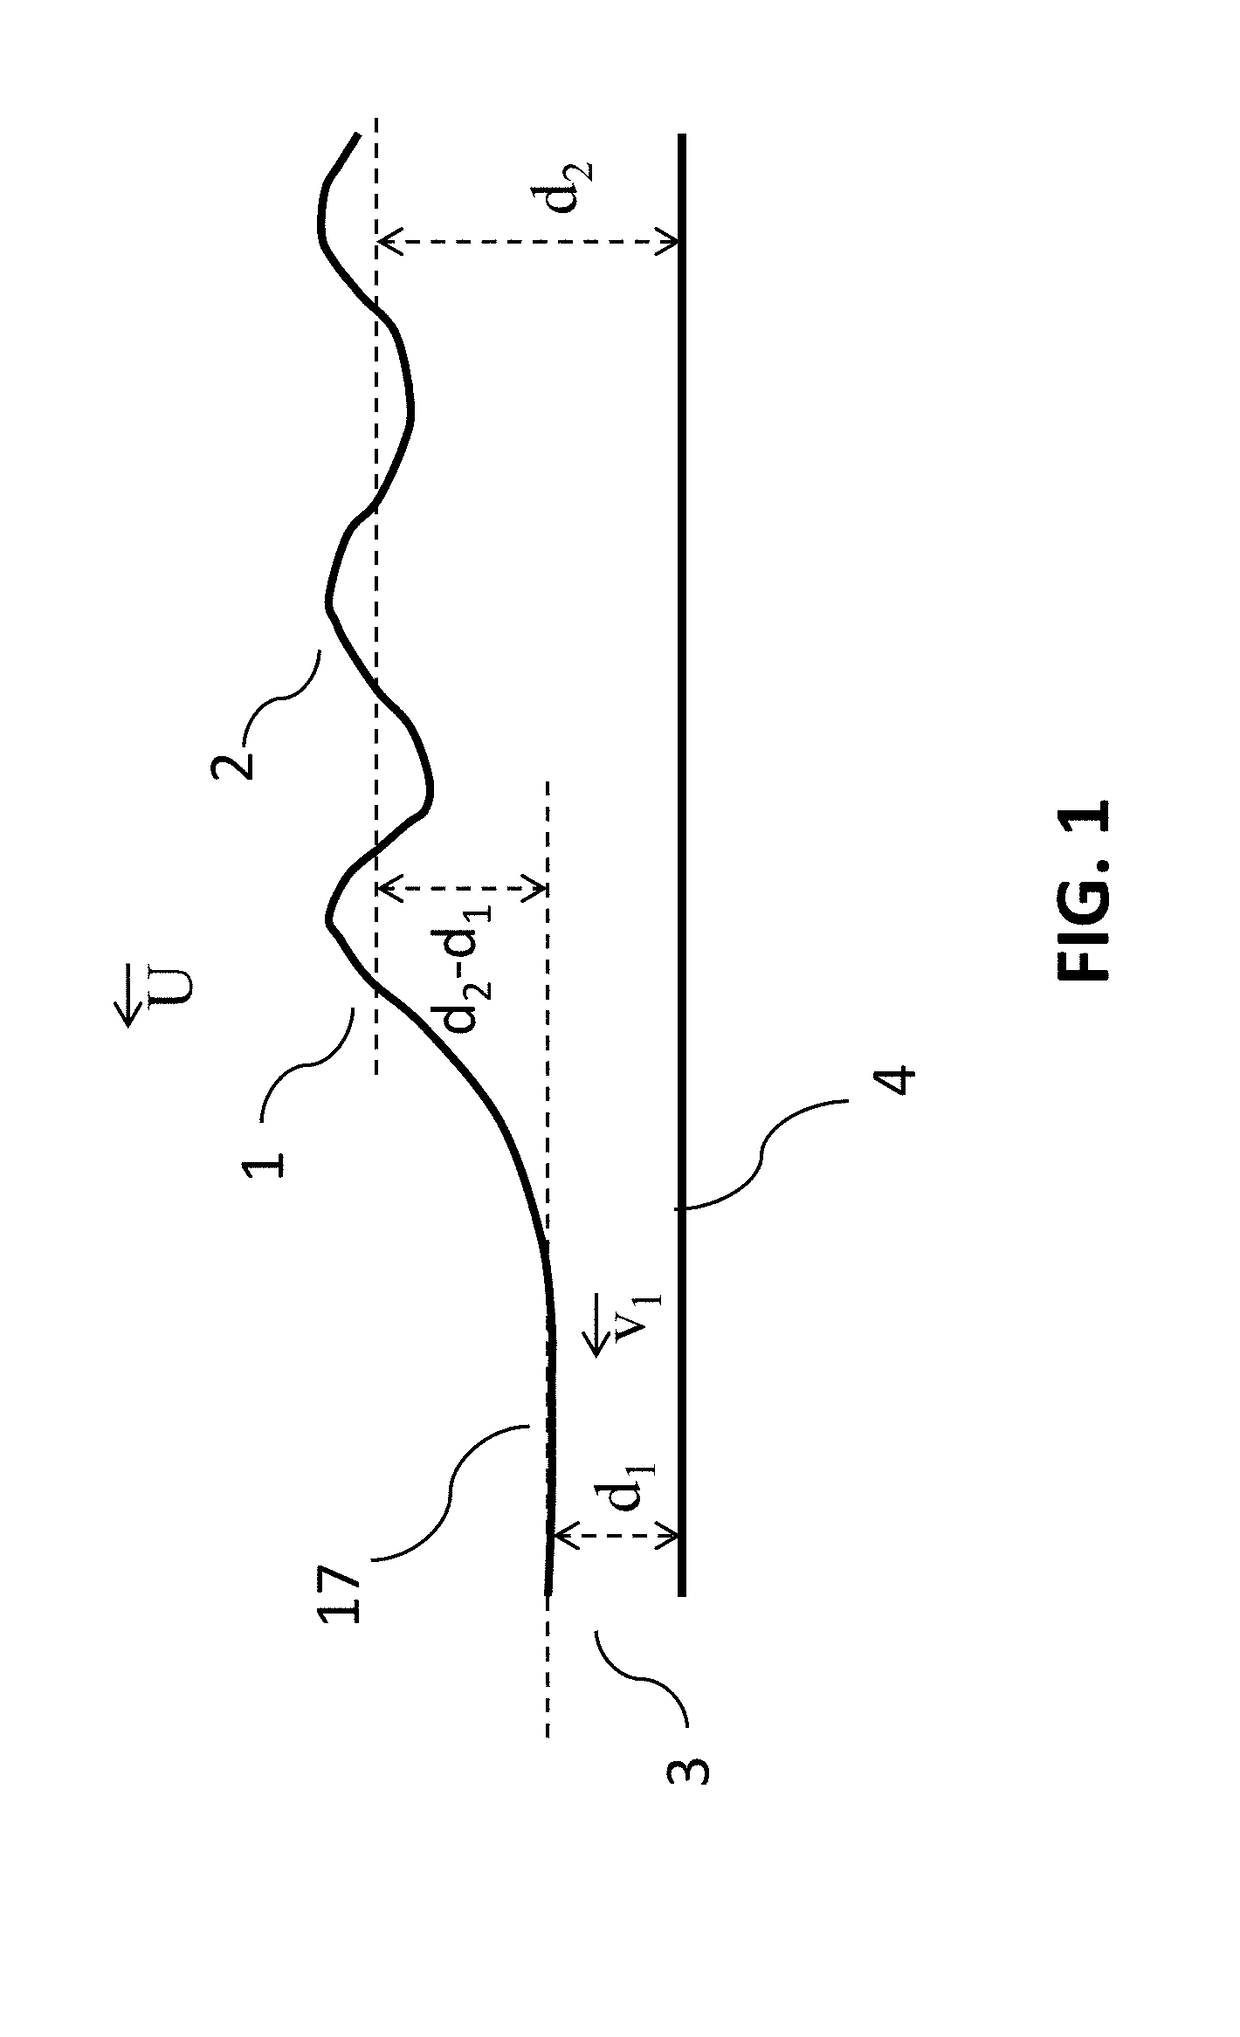 Algae cultivation systems and methods with bore waves